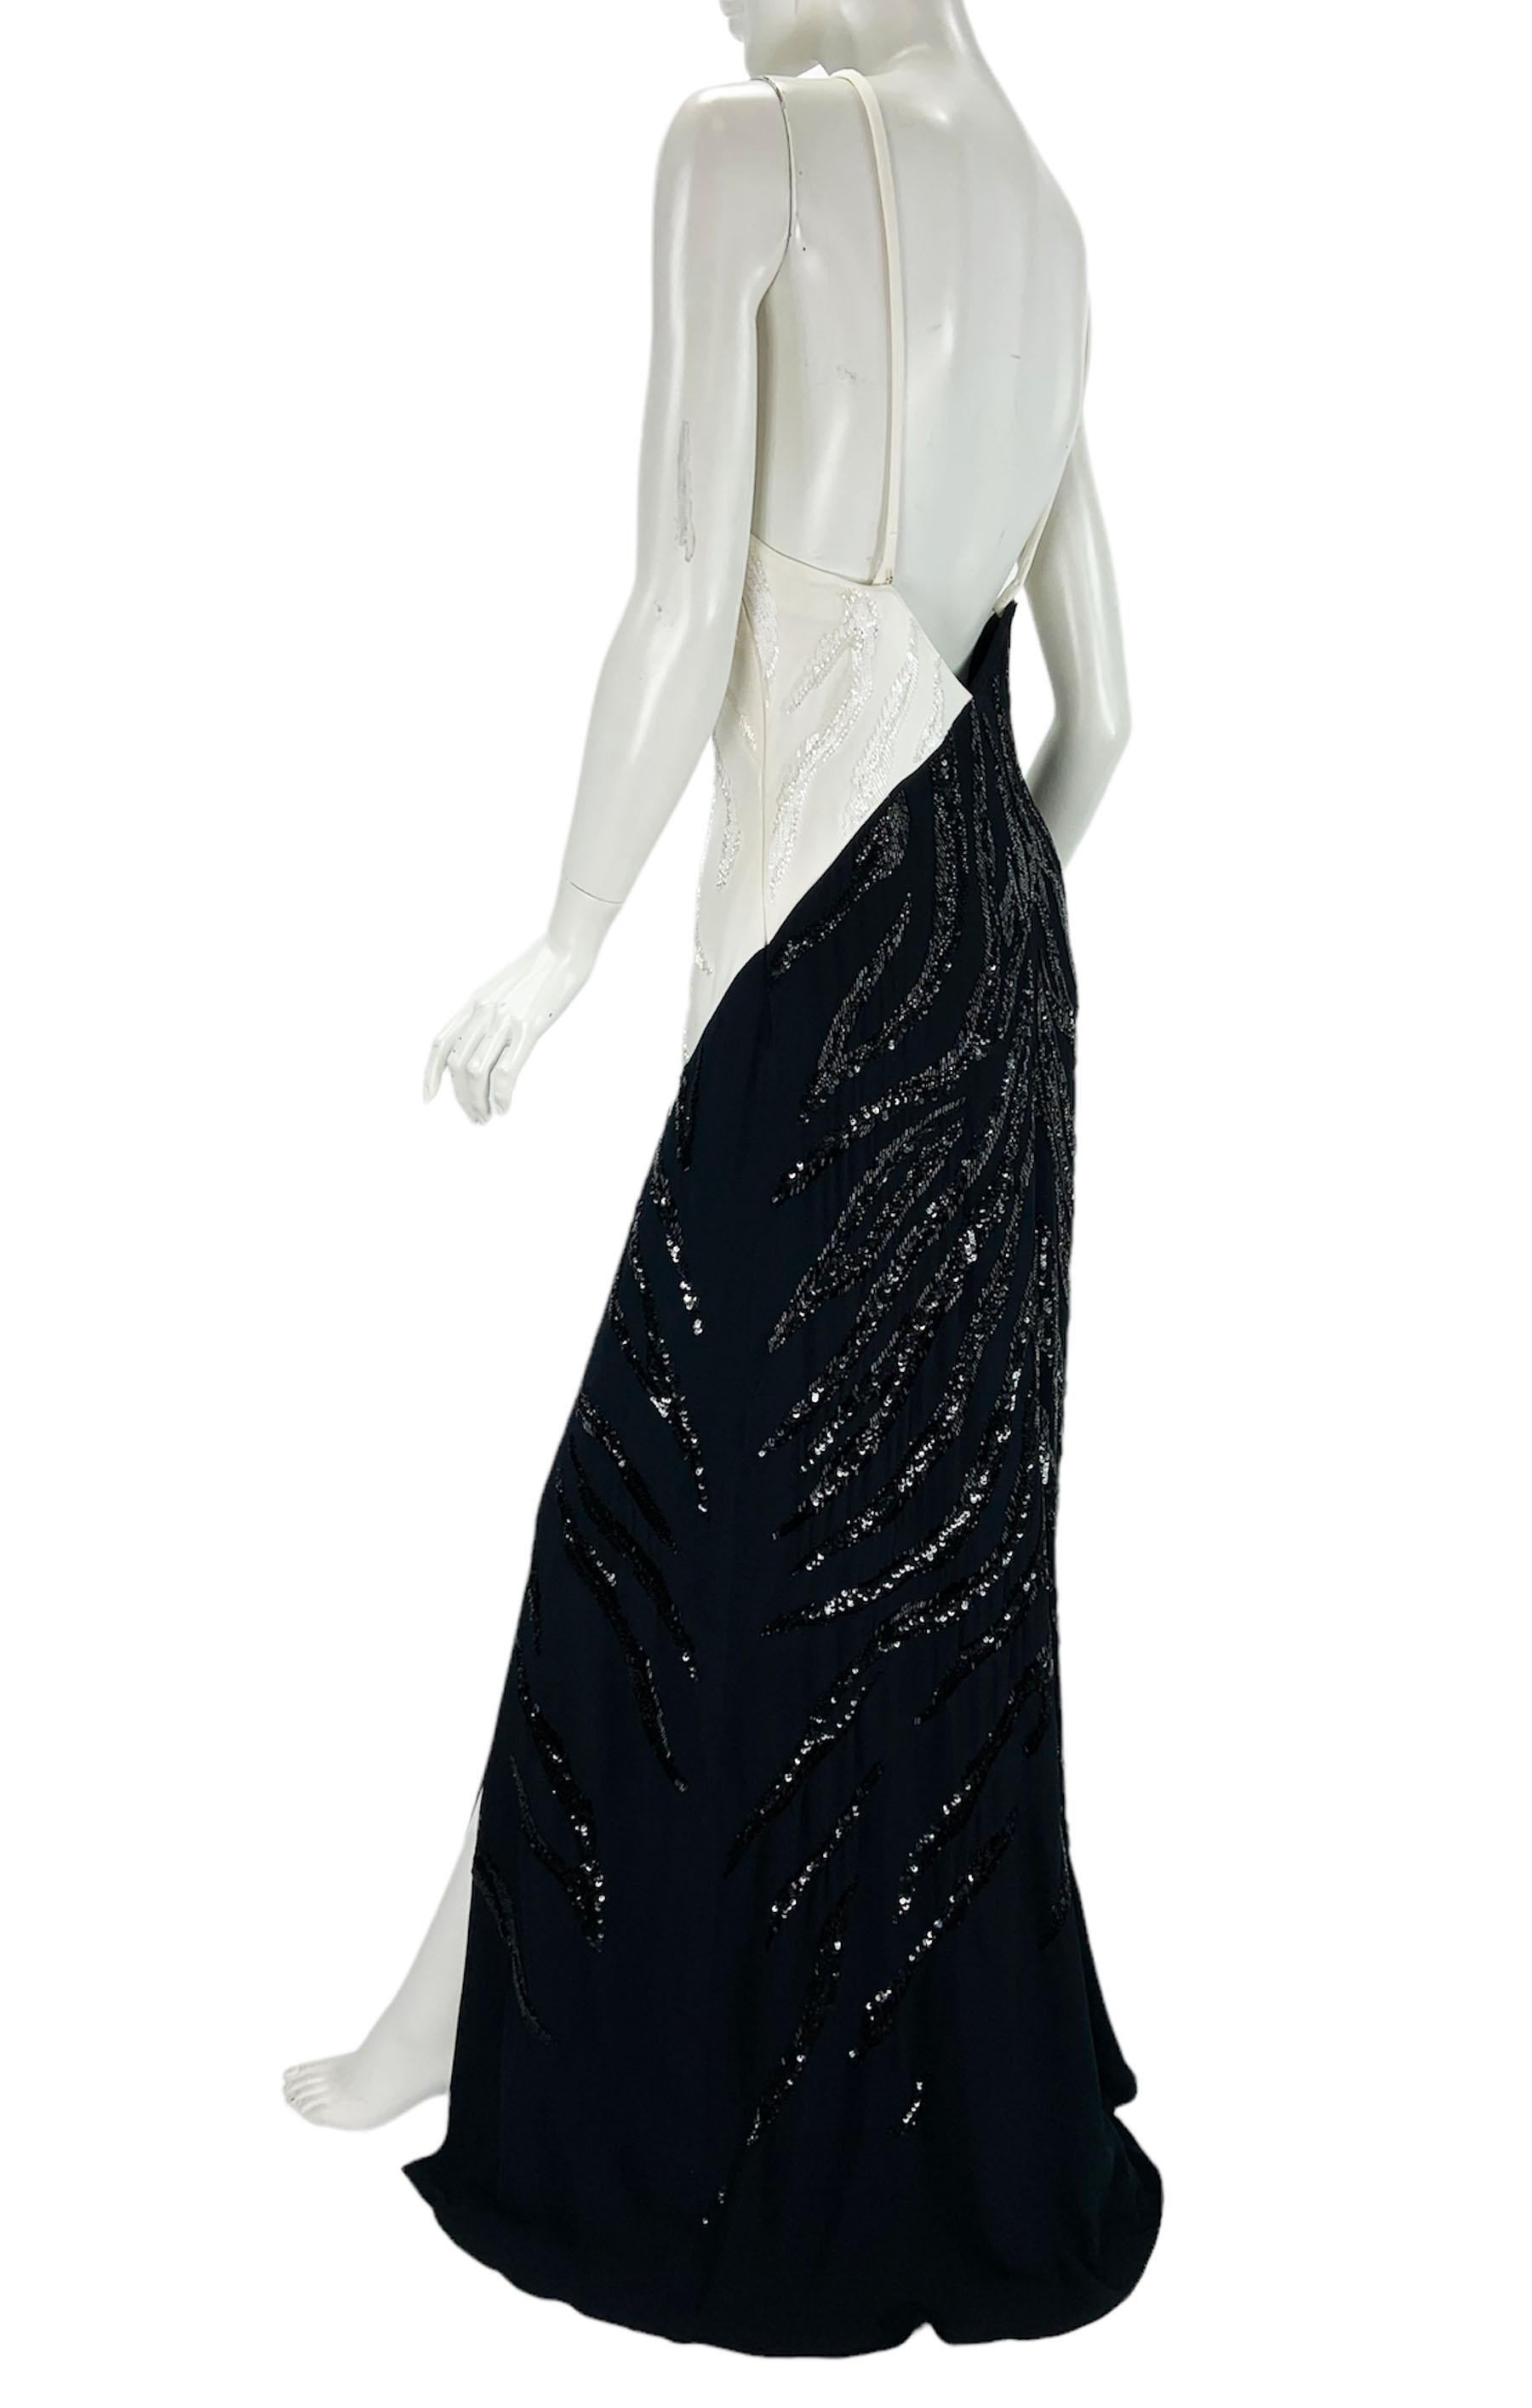 NWT Roberto Cavalli White Black Halter Embellished Maxi Dress Gown It 44 US 8/10 For Sale 1